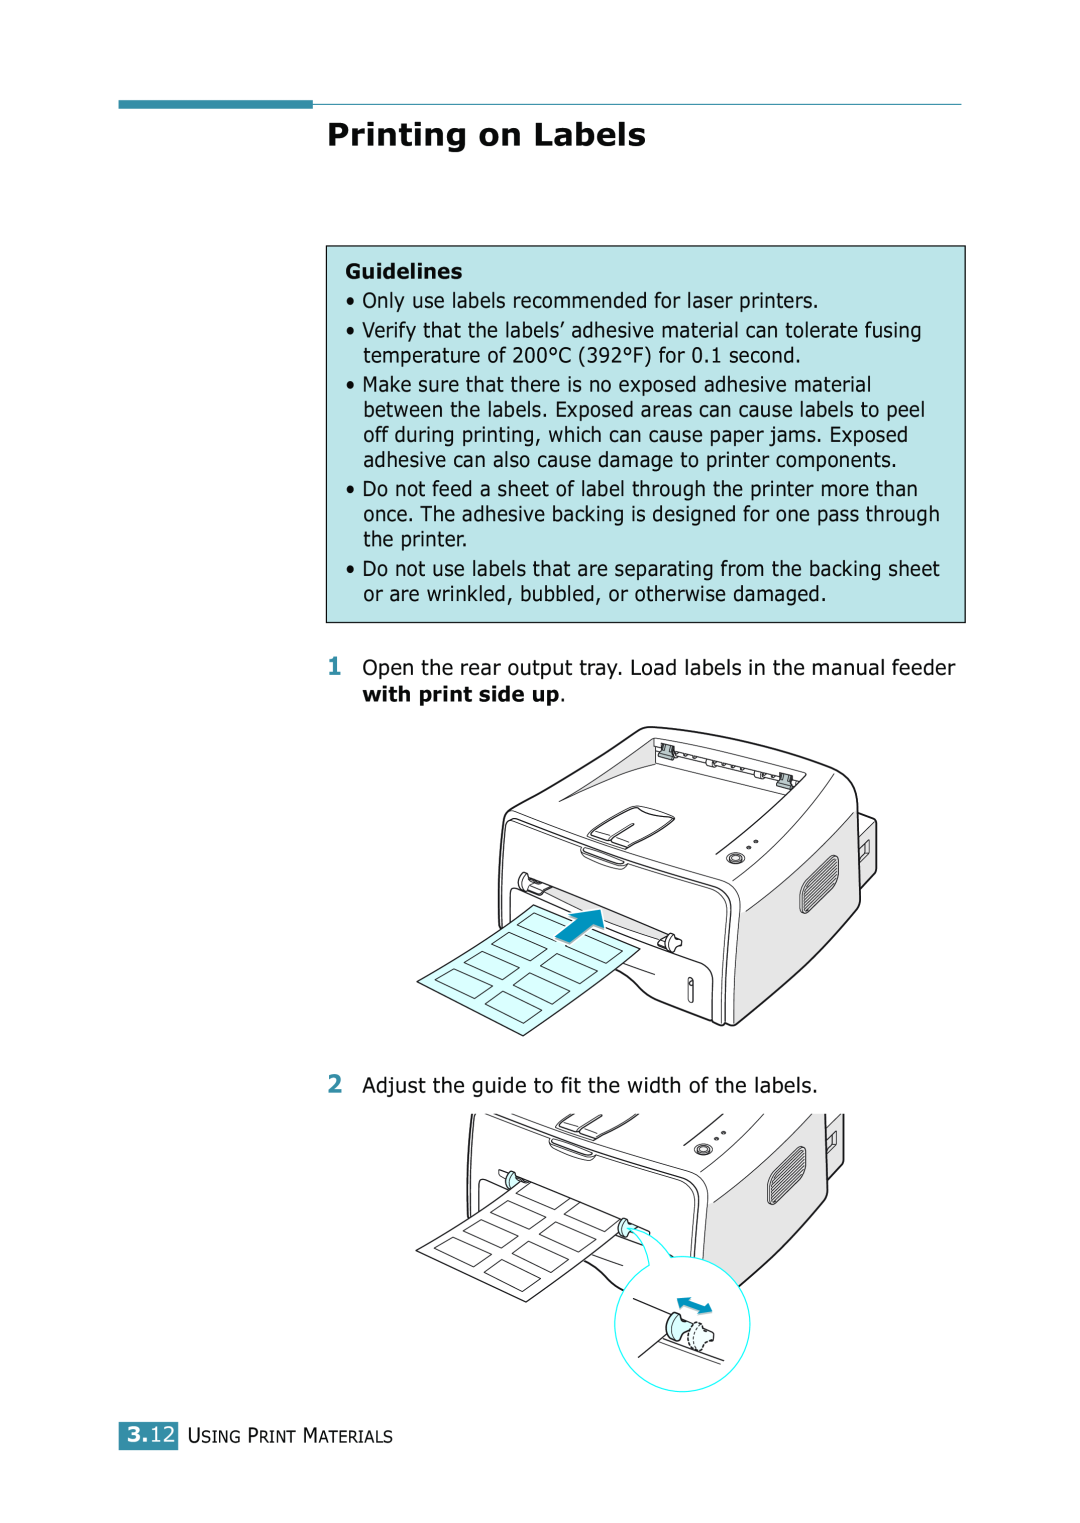 Samsung ML-1520 manual Printing on Labels, Guidelines 